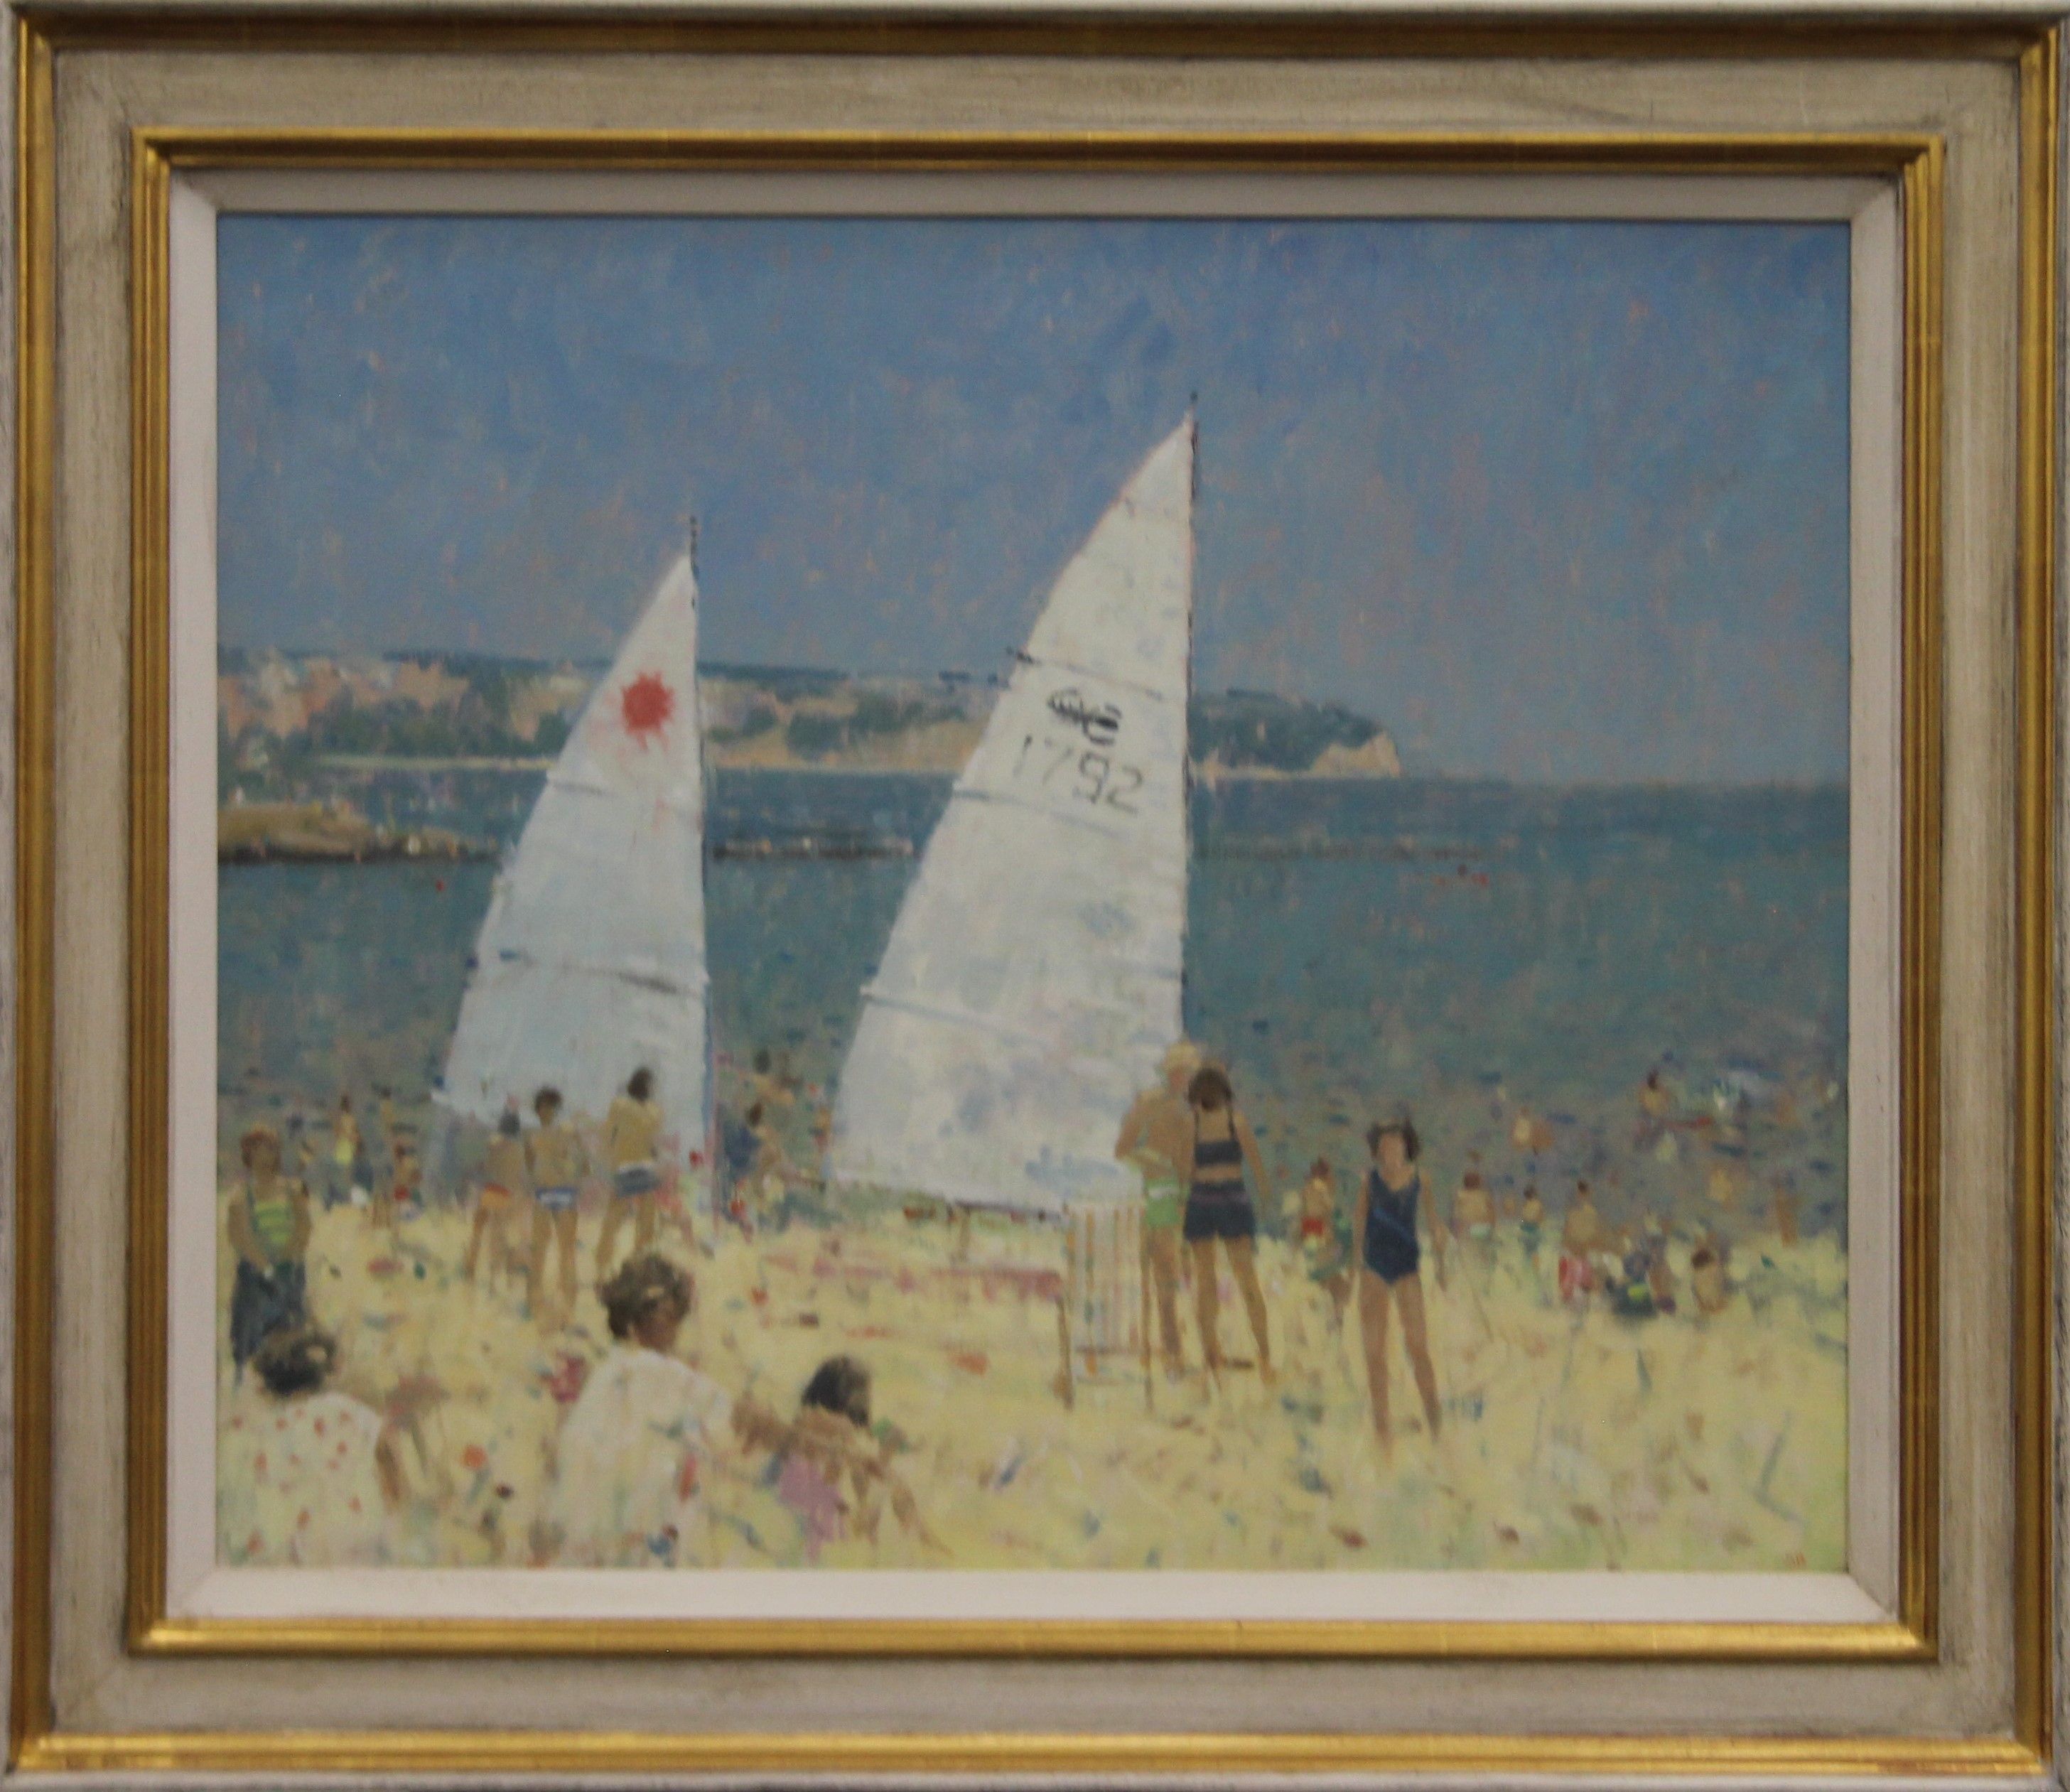 Crowded Beach, signed with initials SB, oil on canvas, framed. 59 x 49 cm. - Image 2 of 2